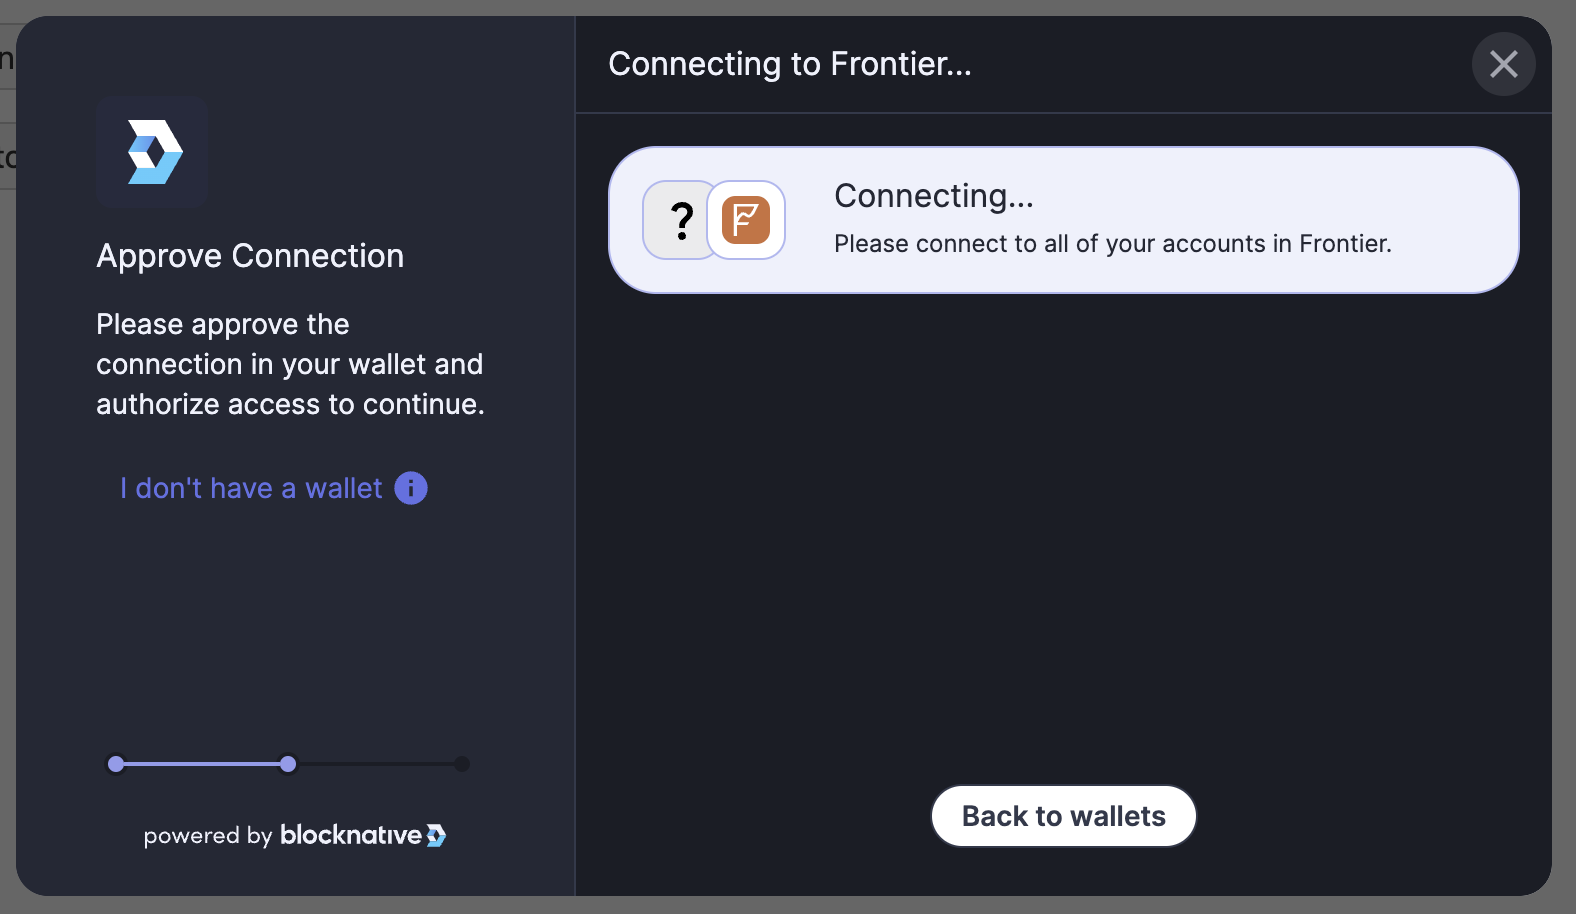 Web3-Onboard connect wallet modal with custom message